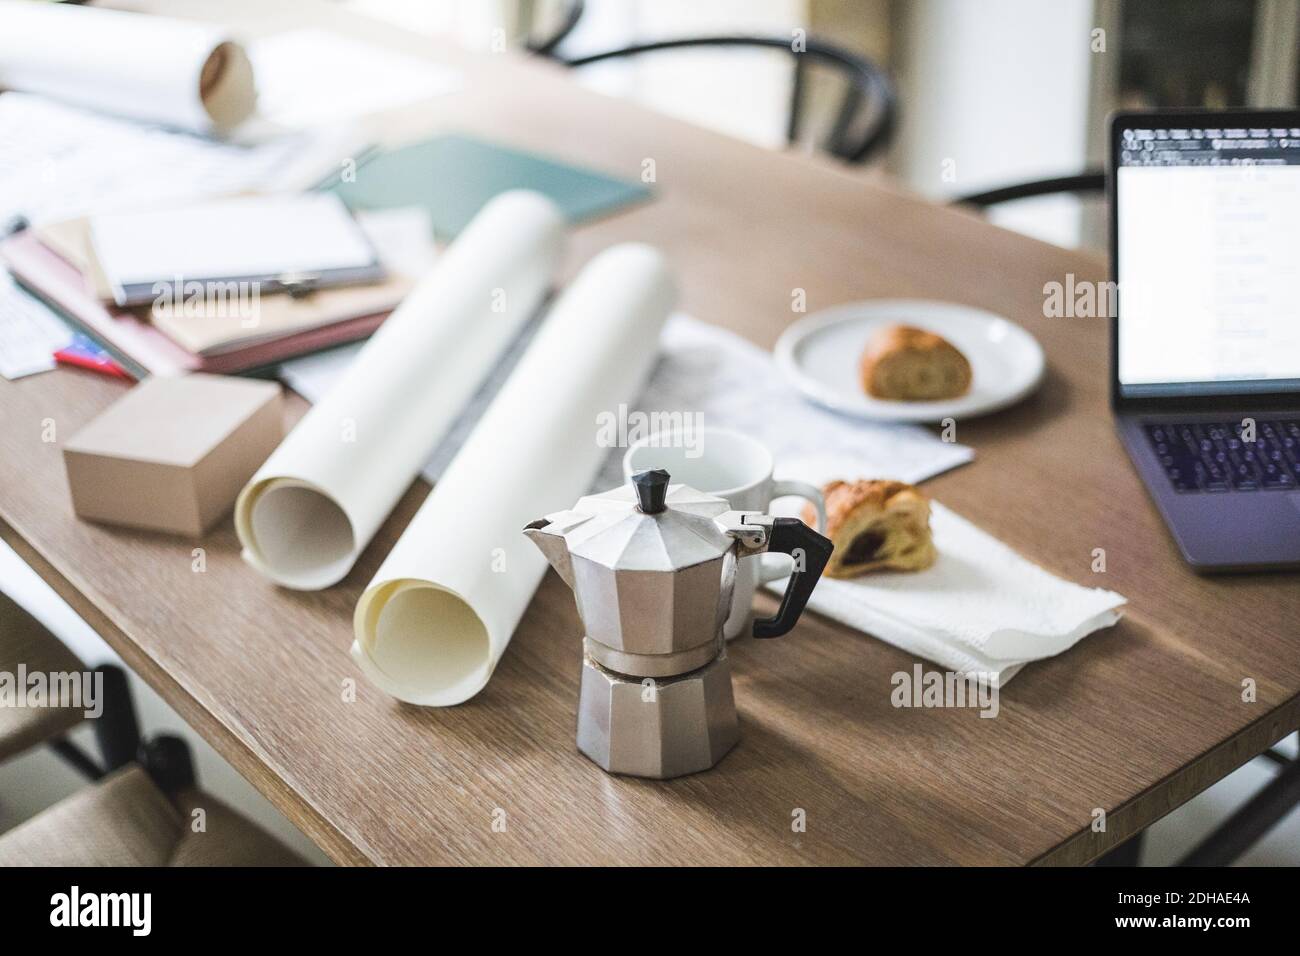 High angle view of teapot with documents rolled up on table Stock Photo